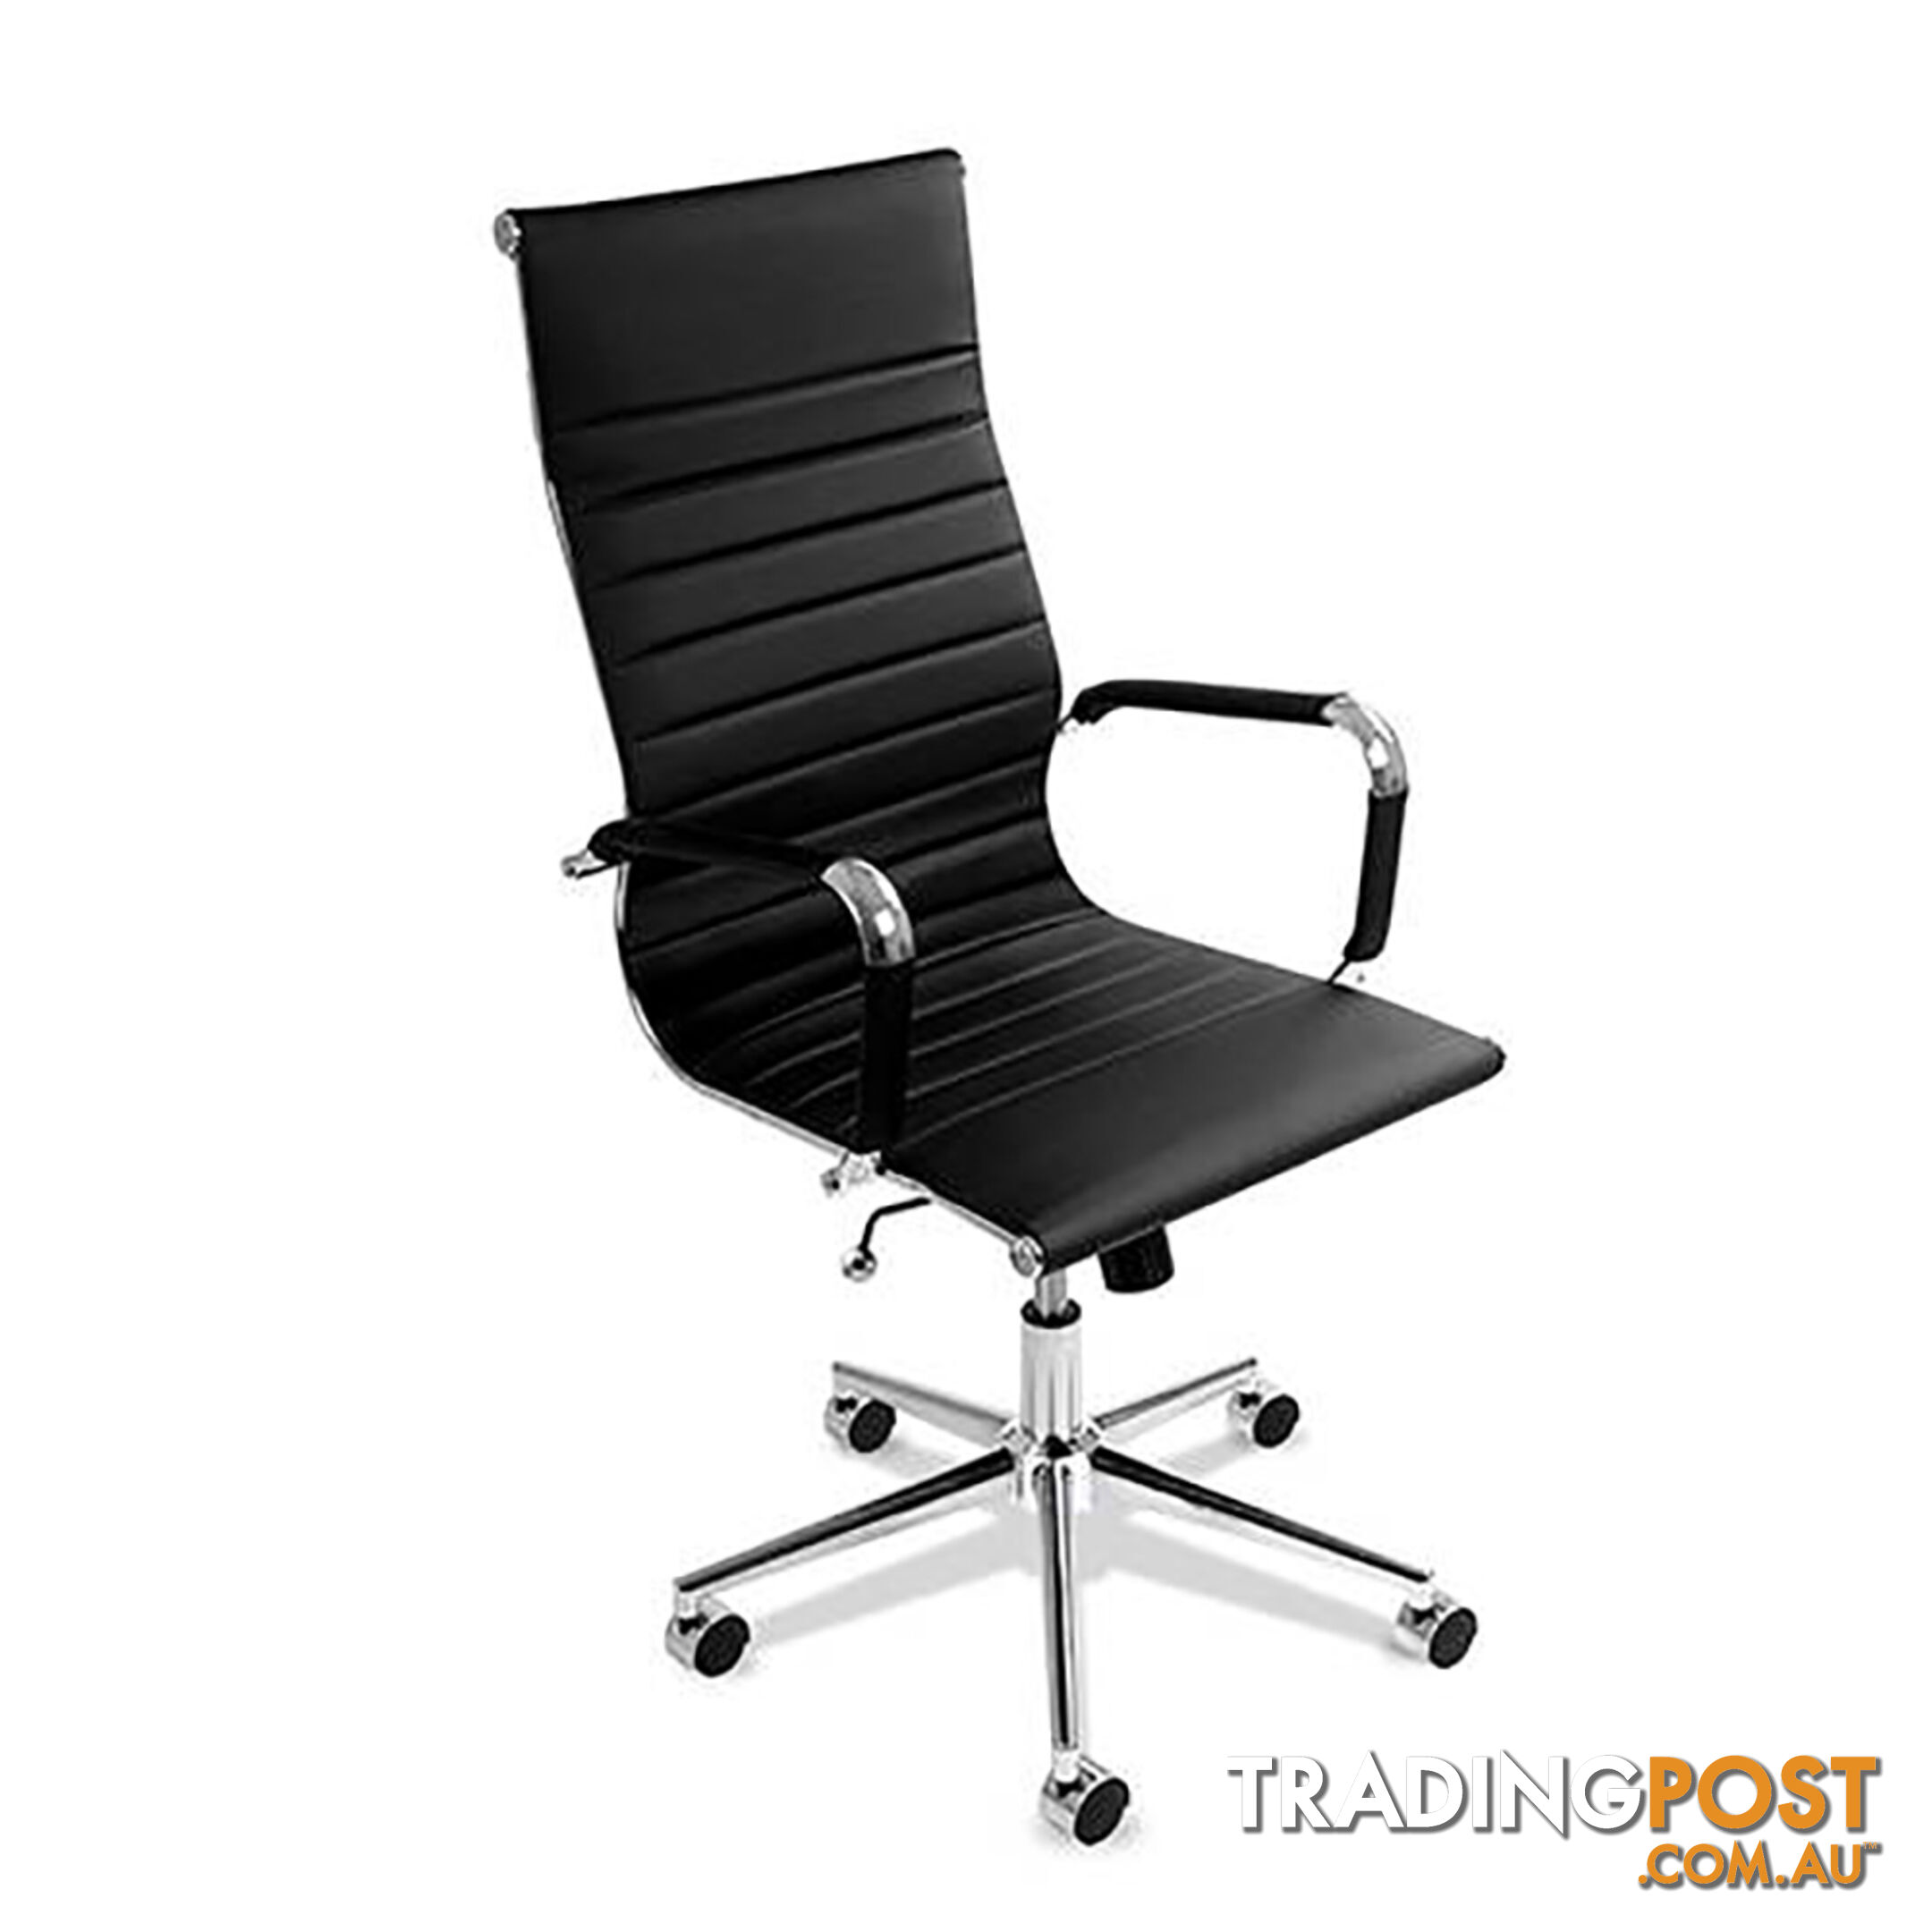 PU Leather High Back Executive Computer Office Chair Eames Replica Black